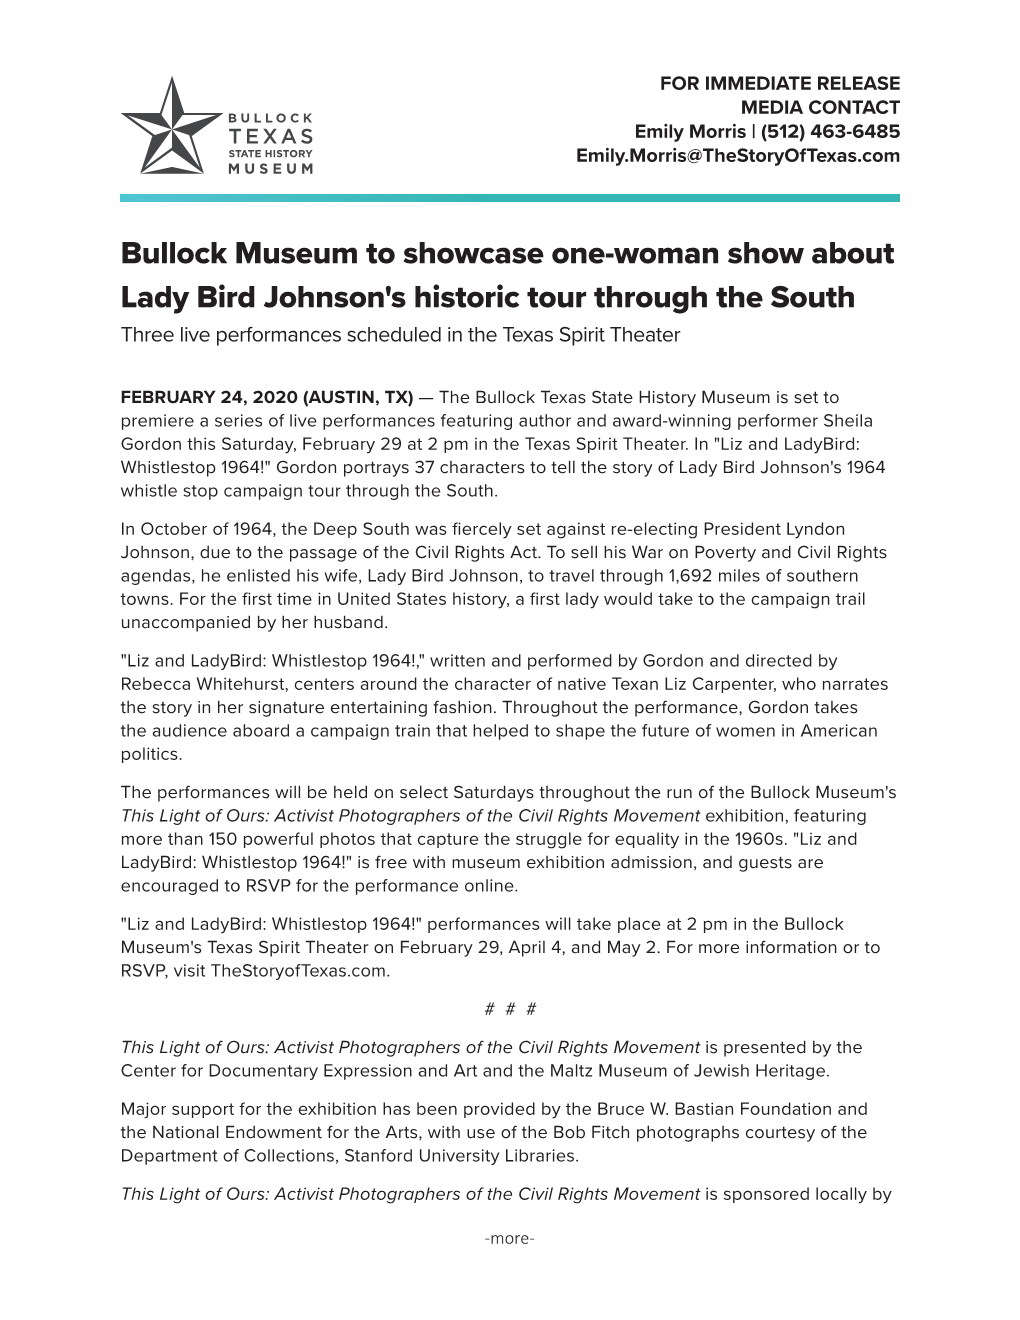 Bullock Museum to Showcase One-Woman Show About Lady Bird Johnson's Historic Tour Through the South Three Live Performances Scheduled in the Texas Spirit Theater